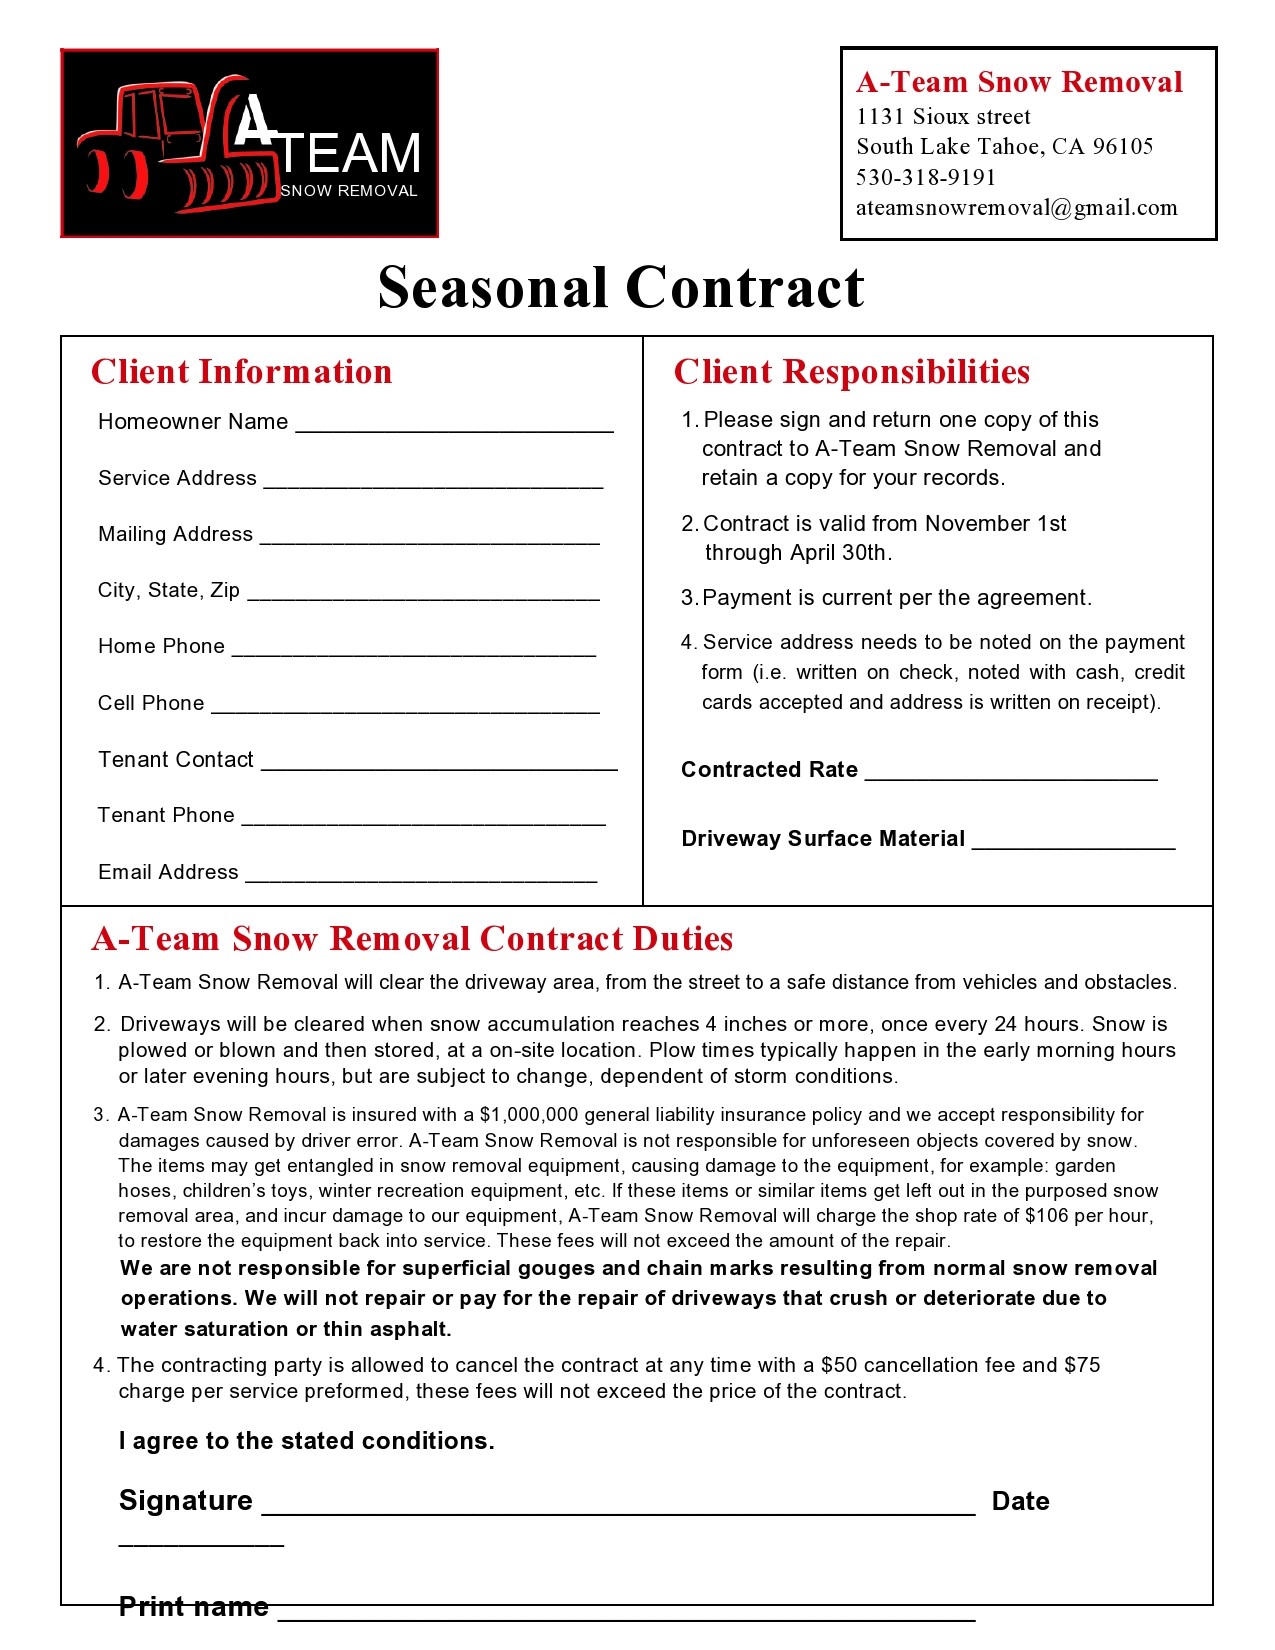 Free snow removal contract 26